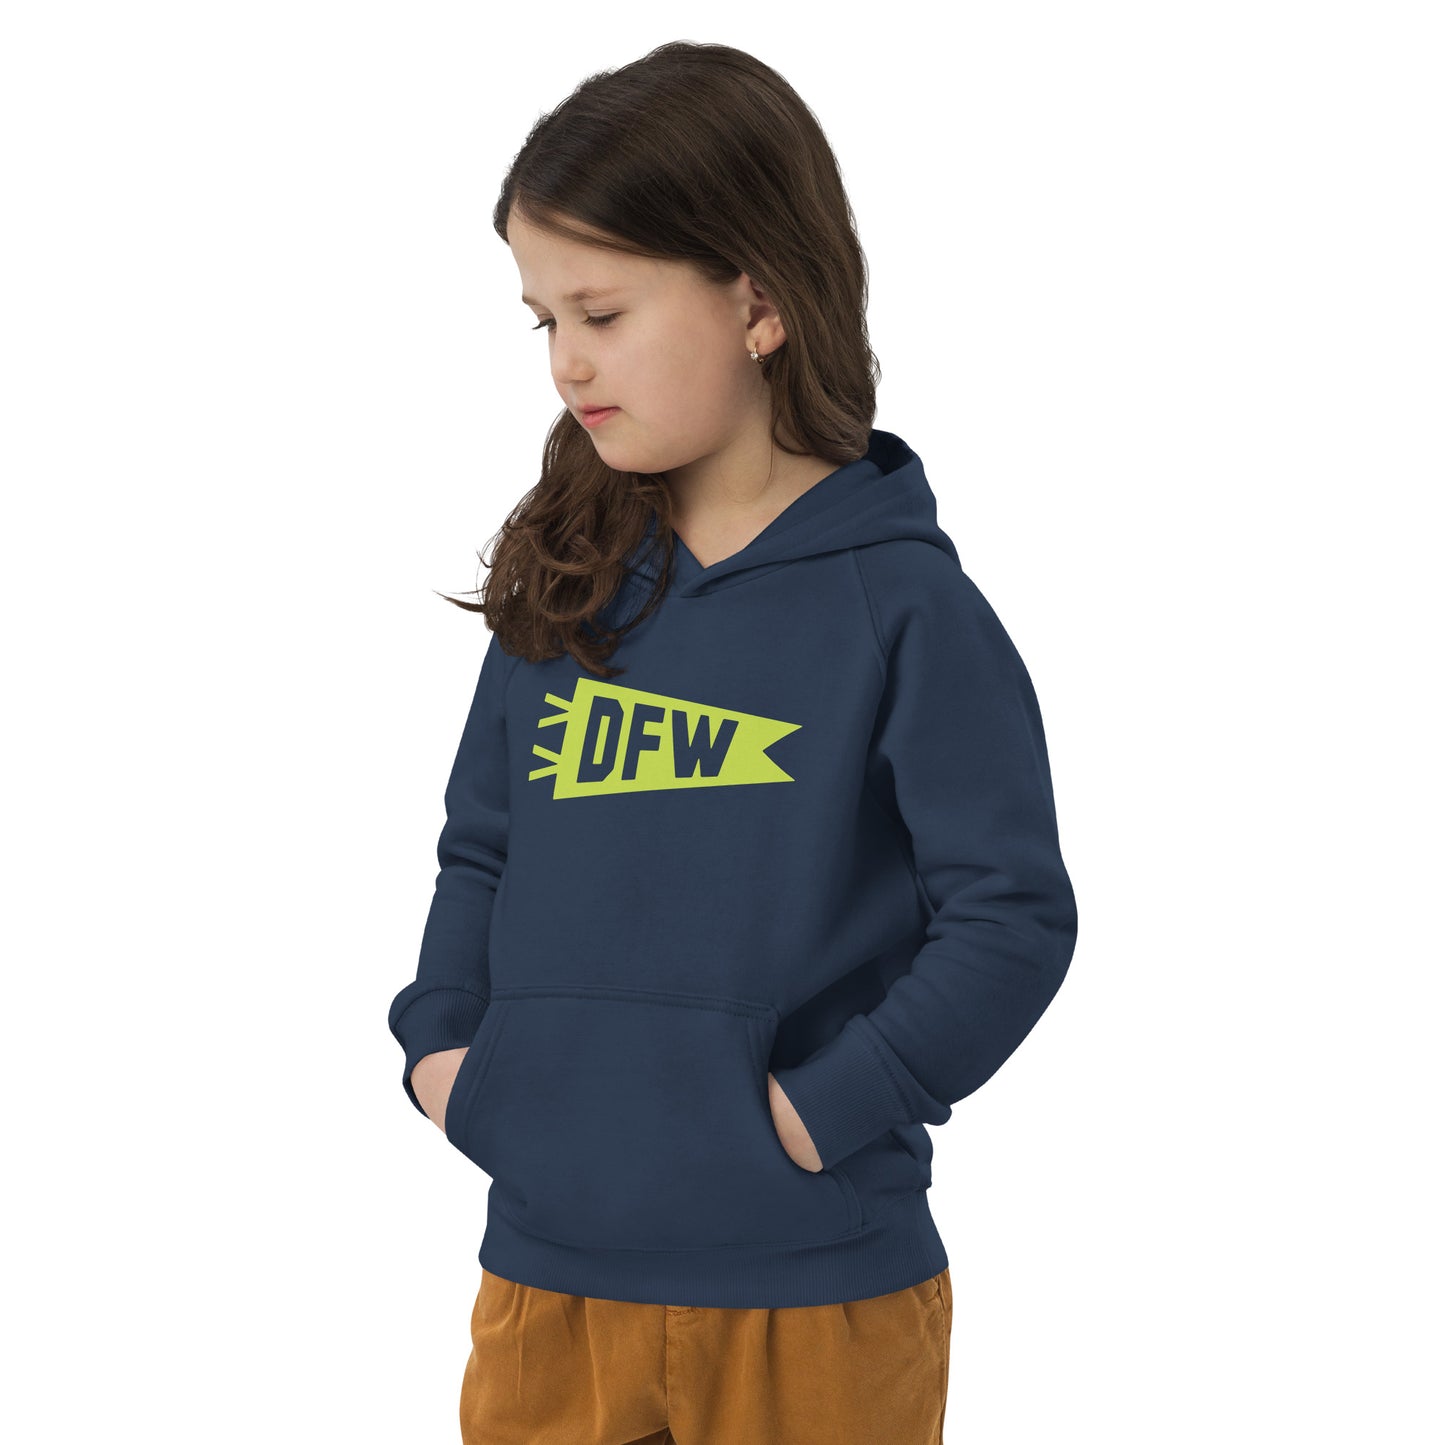 Kid's Sustainable Hoodie - Green Graphic • DFW Dallas • YHM Designs - Image 05